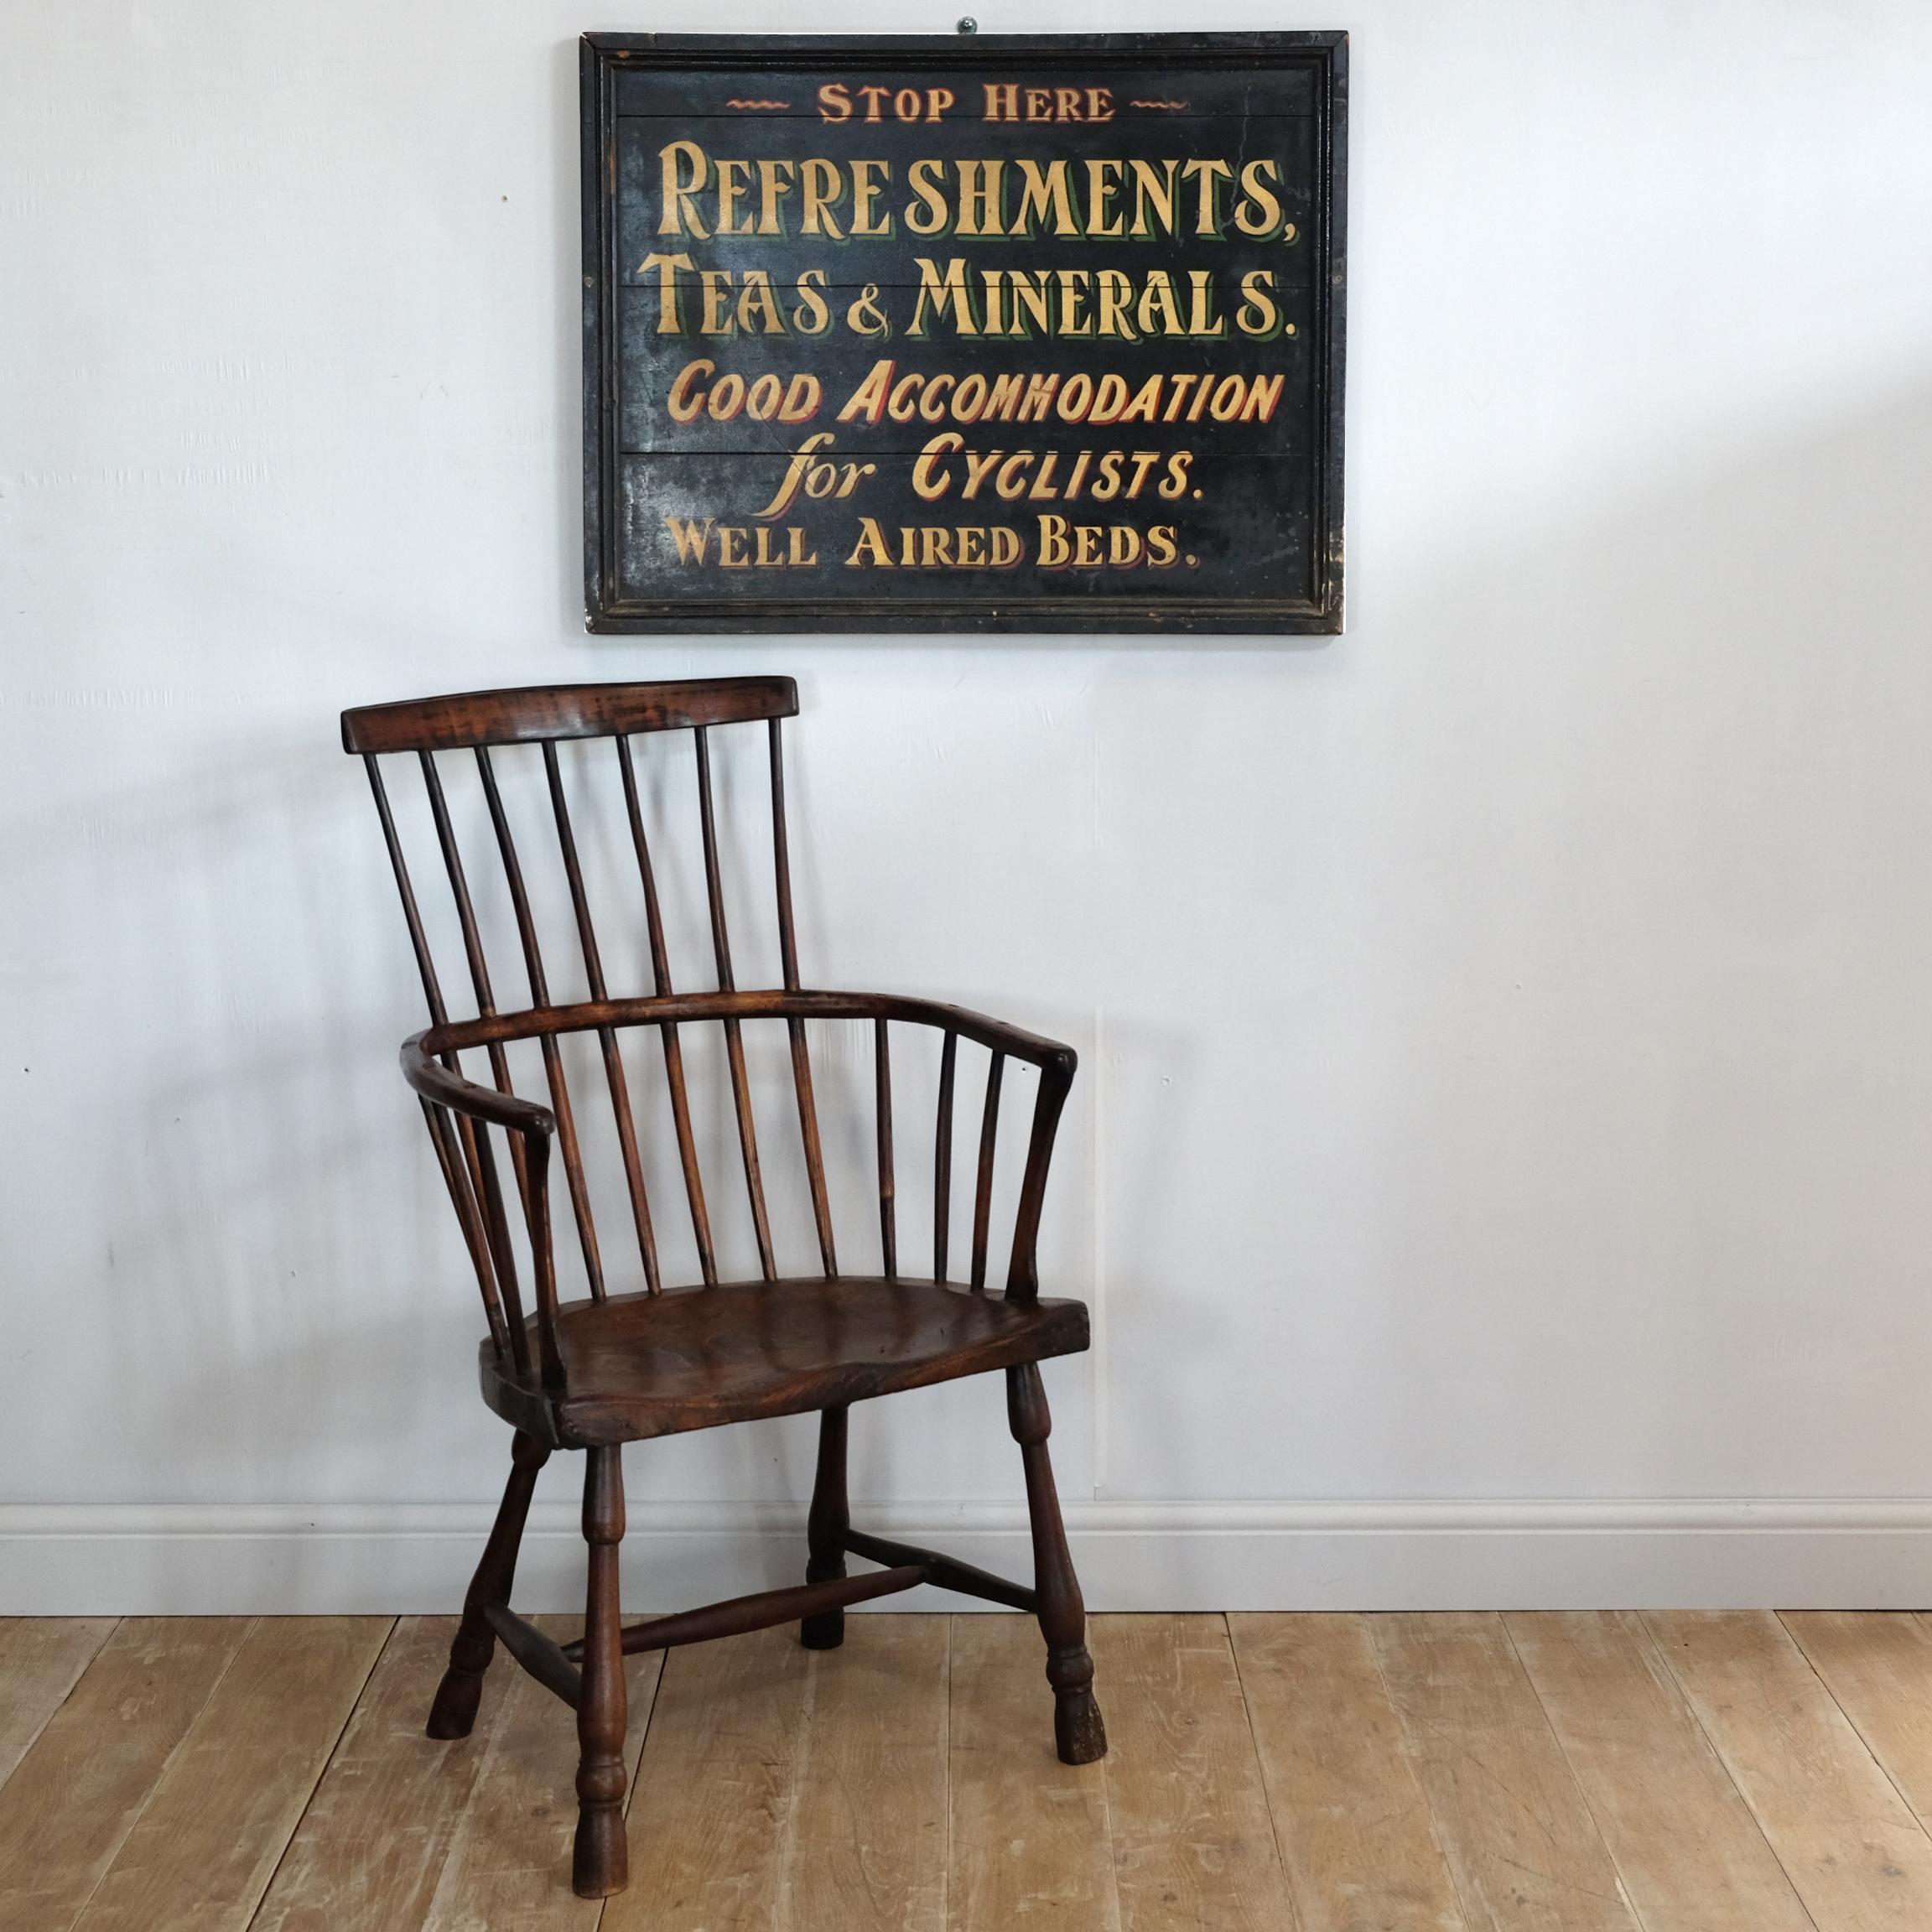 An original large English antique hand painted wooden sign from an old tavern with wonderful wording. Double sided with the same words to the reverse. With wall-hanging bracket attached, early 20th century.

